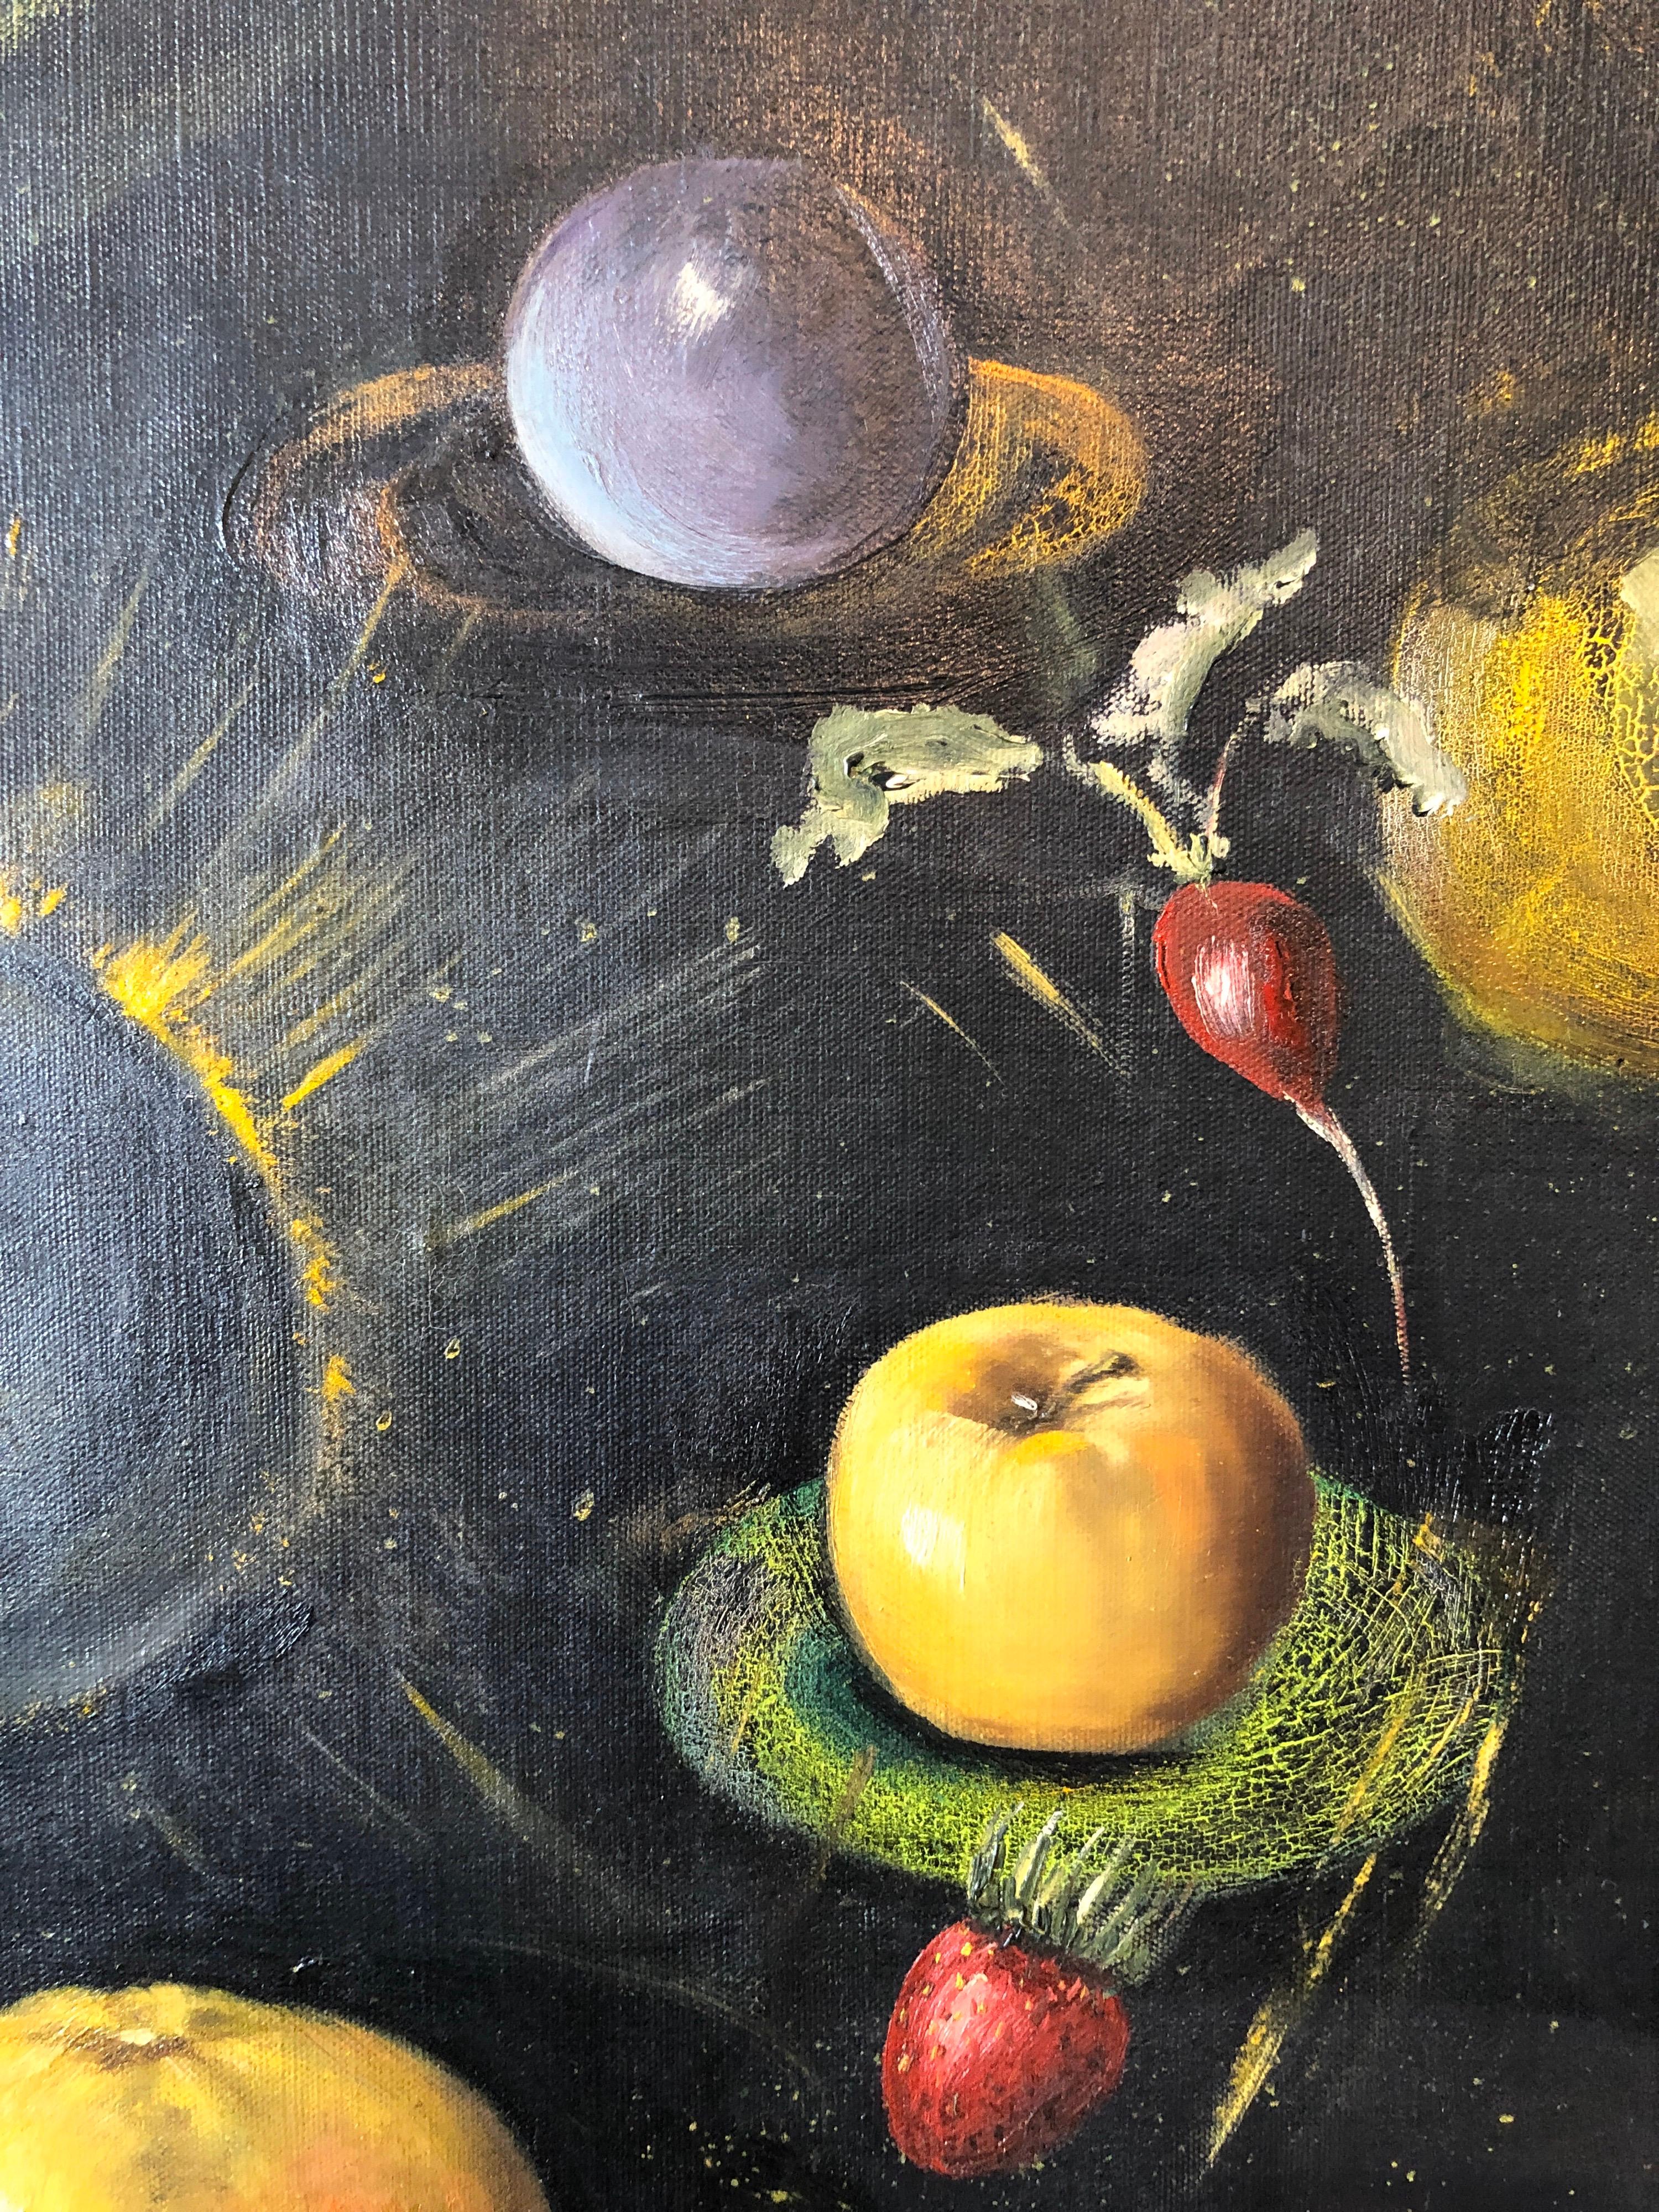 John Alton (American, 20thc.) Cosmic Fruits and Vegetables, 1960, oil on canvas, signed and dated lower left, framed. Bearing Art Services, Los Angeles label verso 25 in. x  30 in. canvas size,  26 in. x 32 in. as framed.

John Alton, A.S.C. born